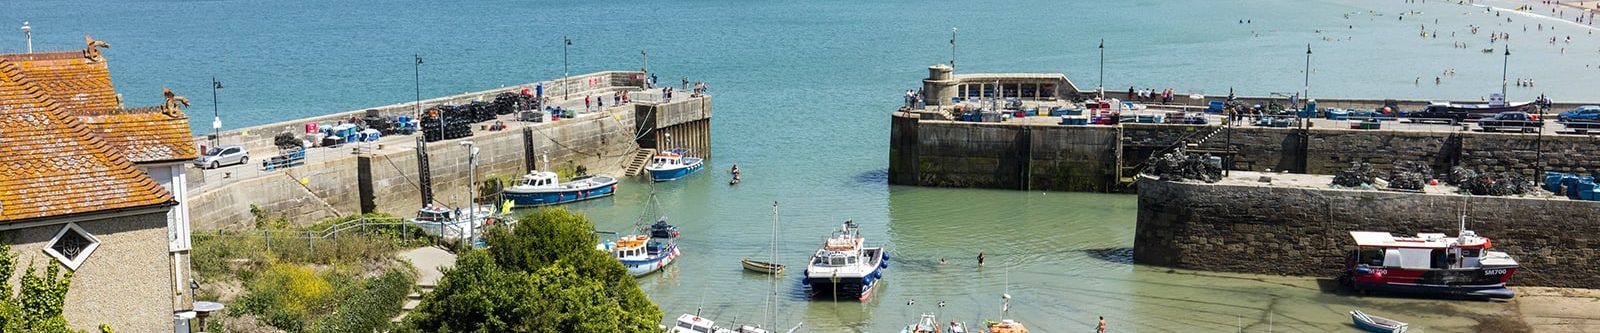 Newquay harbour and boats